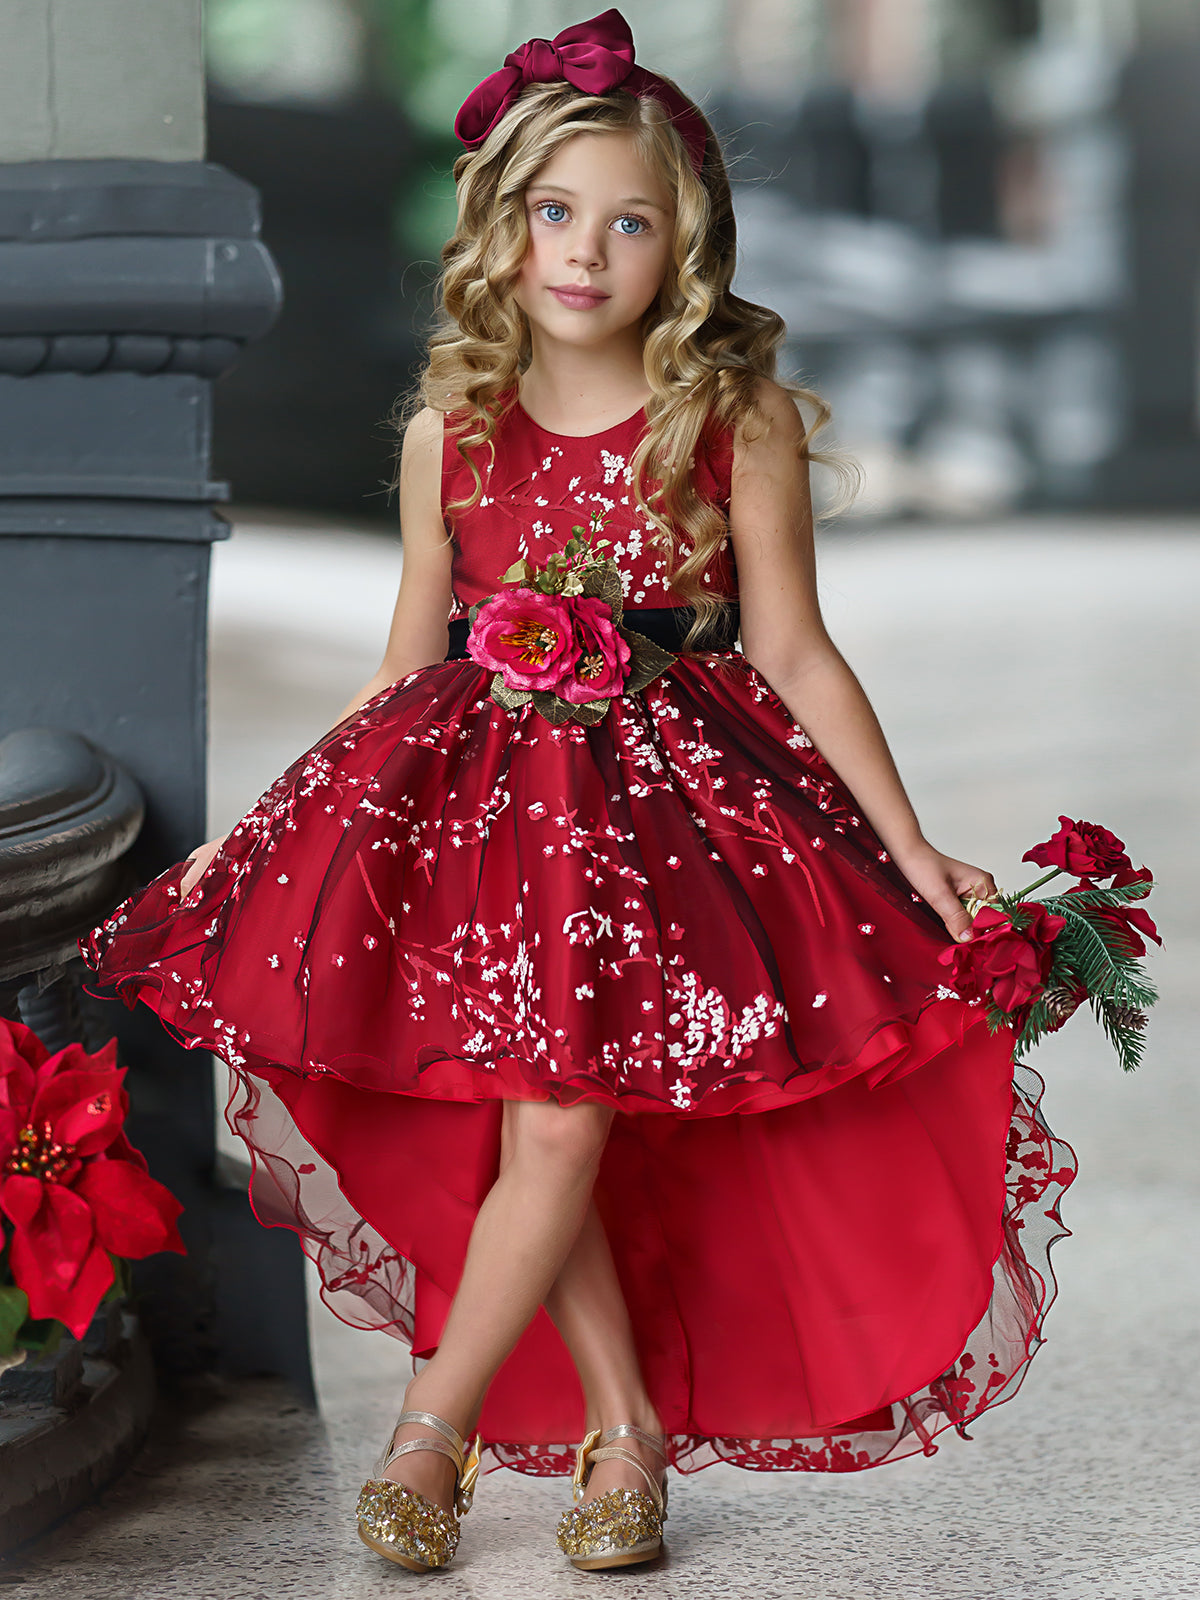 Girls Formal Dresses | Cherry Blossom Embroidered Hi-Lo Party Dress